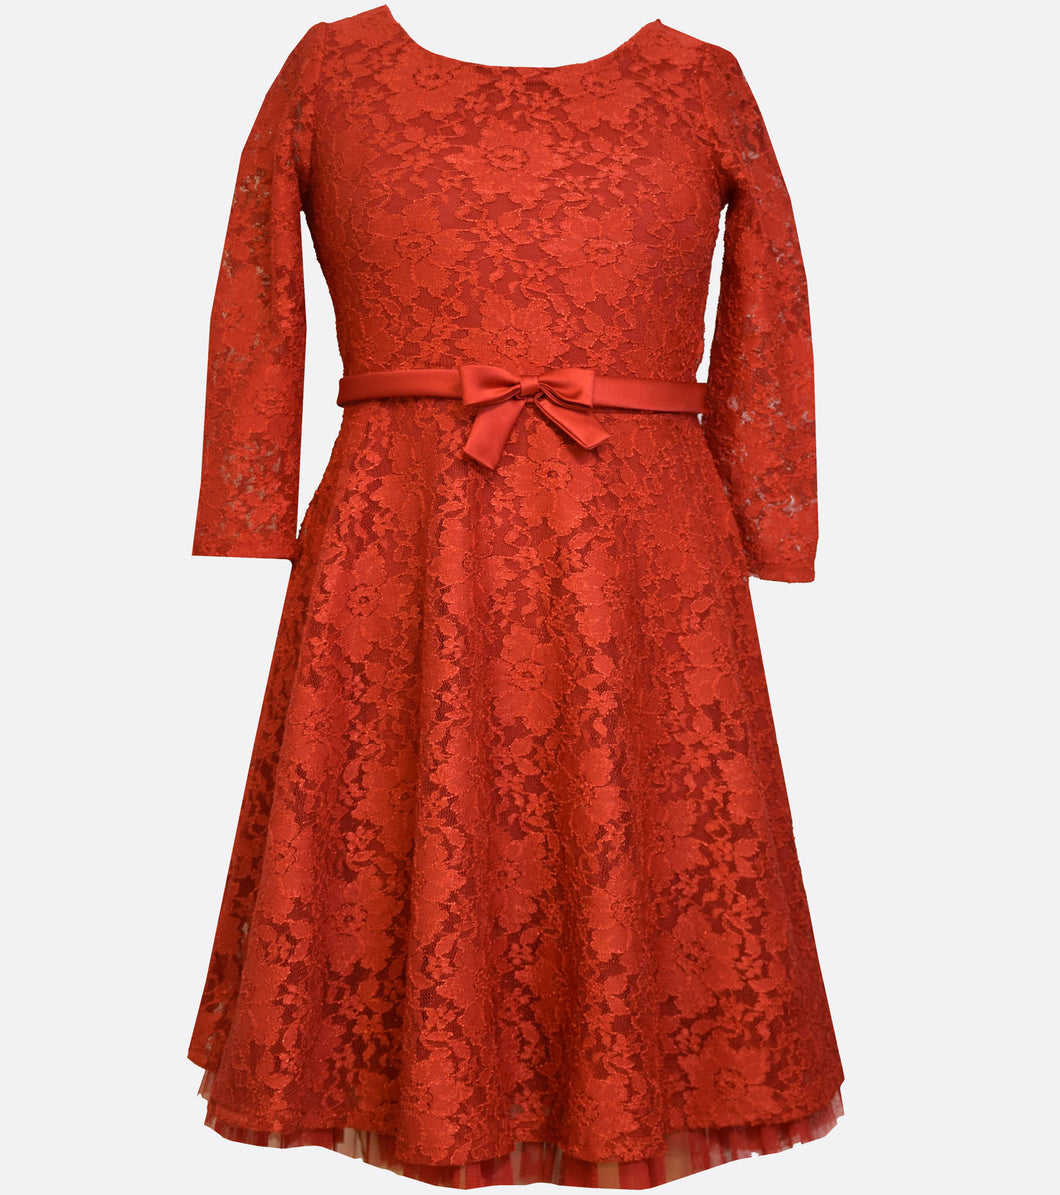 Bonnie Jean long sleeved red lace dress with a red satin waist band and bow.